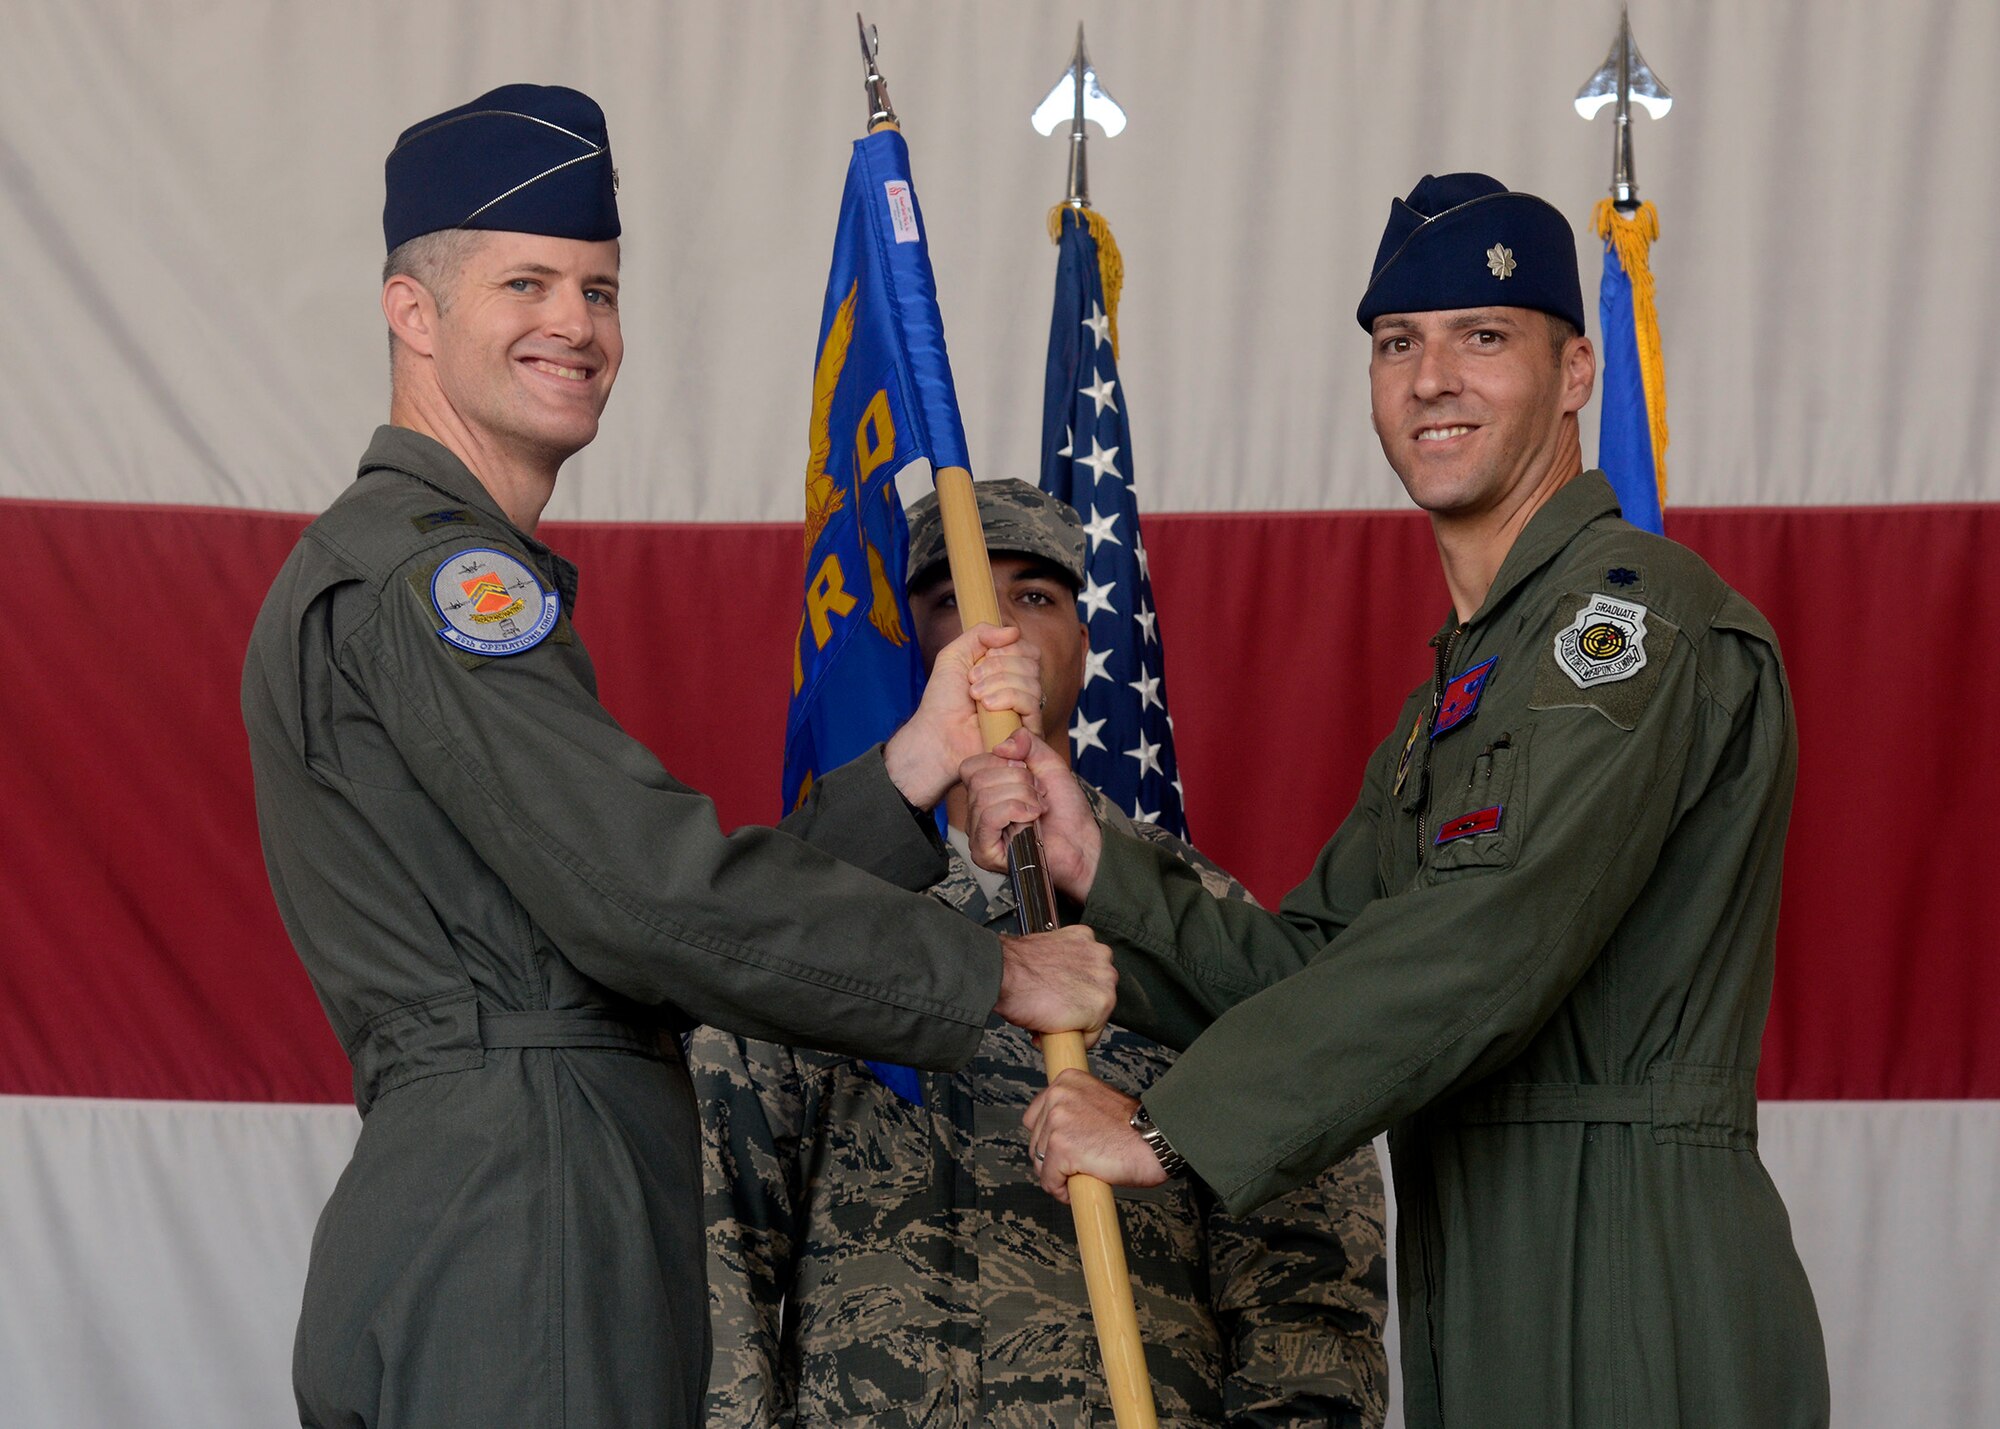 Col. Benjamin Bishop, 56th Operations Group commander, passes the guidon to Lt. Col. Matthew Vedder as he assumes command of the 63rd Fighter Squadron Aug. 1, 2016 at Luke Air Force Base, Ariz. The 63rd FS is scheduled to begin accepting F-35 Lightning II jets in March 2017 and will be joined by partner nation Turkey. (U.S. Air Force photo by Senior Airman Devante Williams)